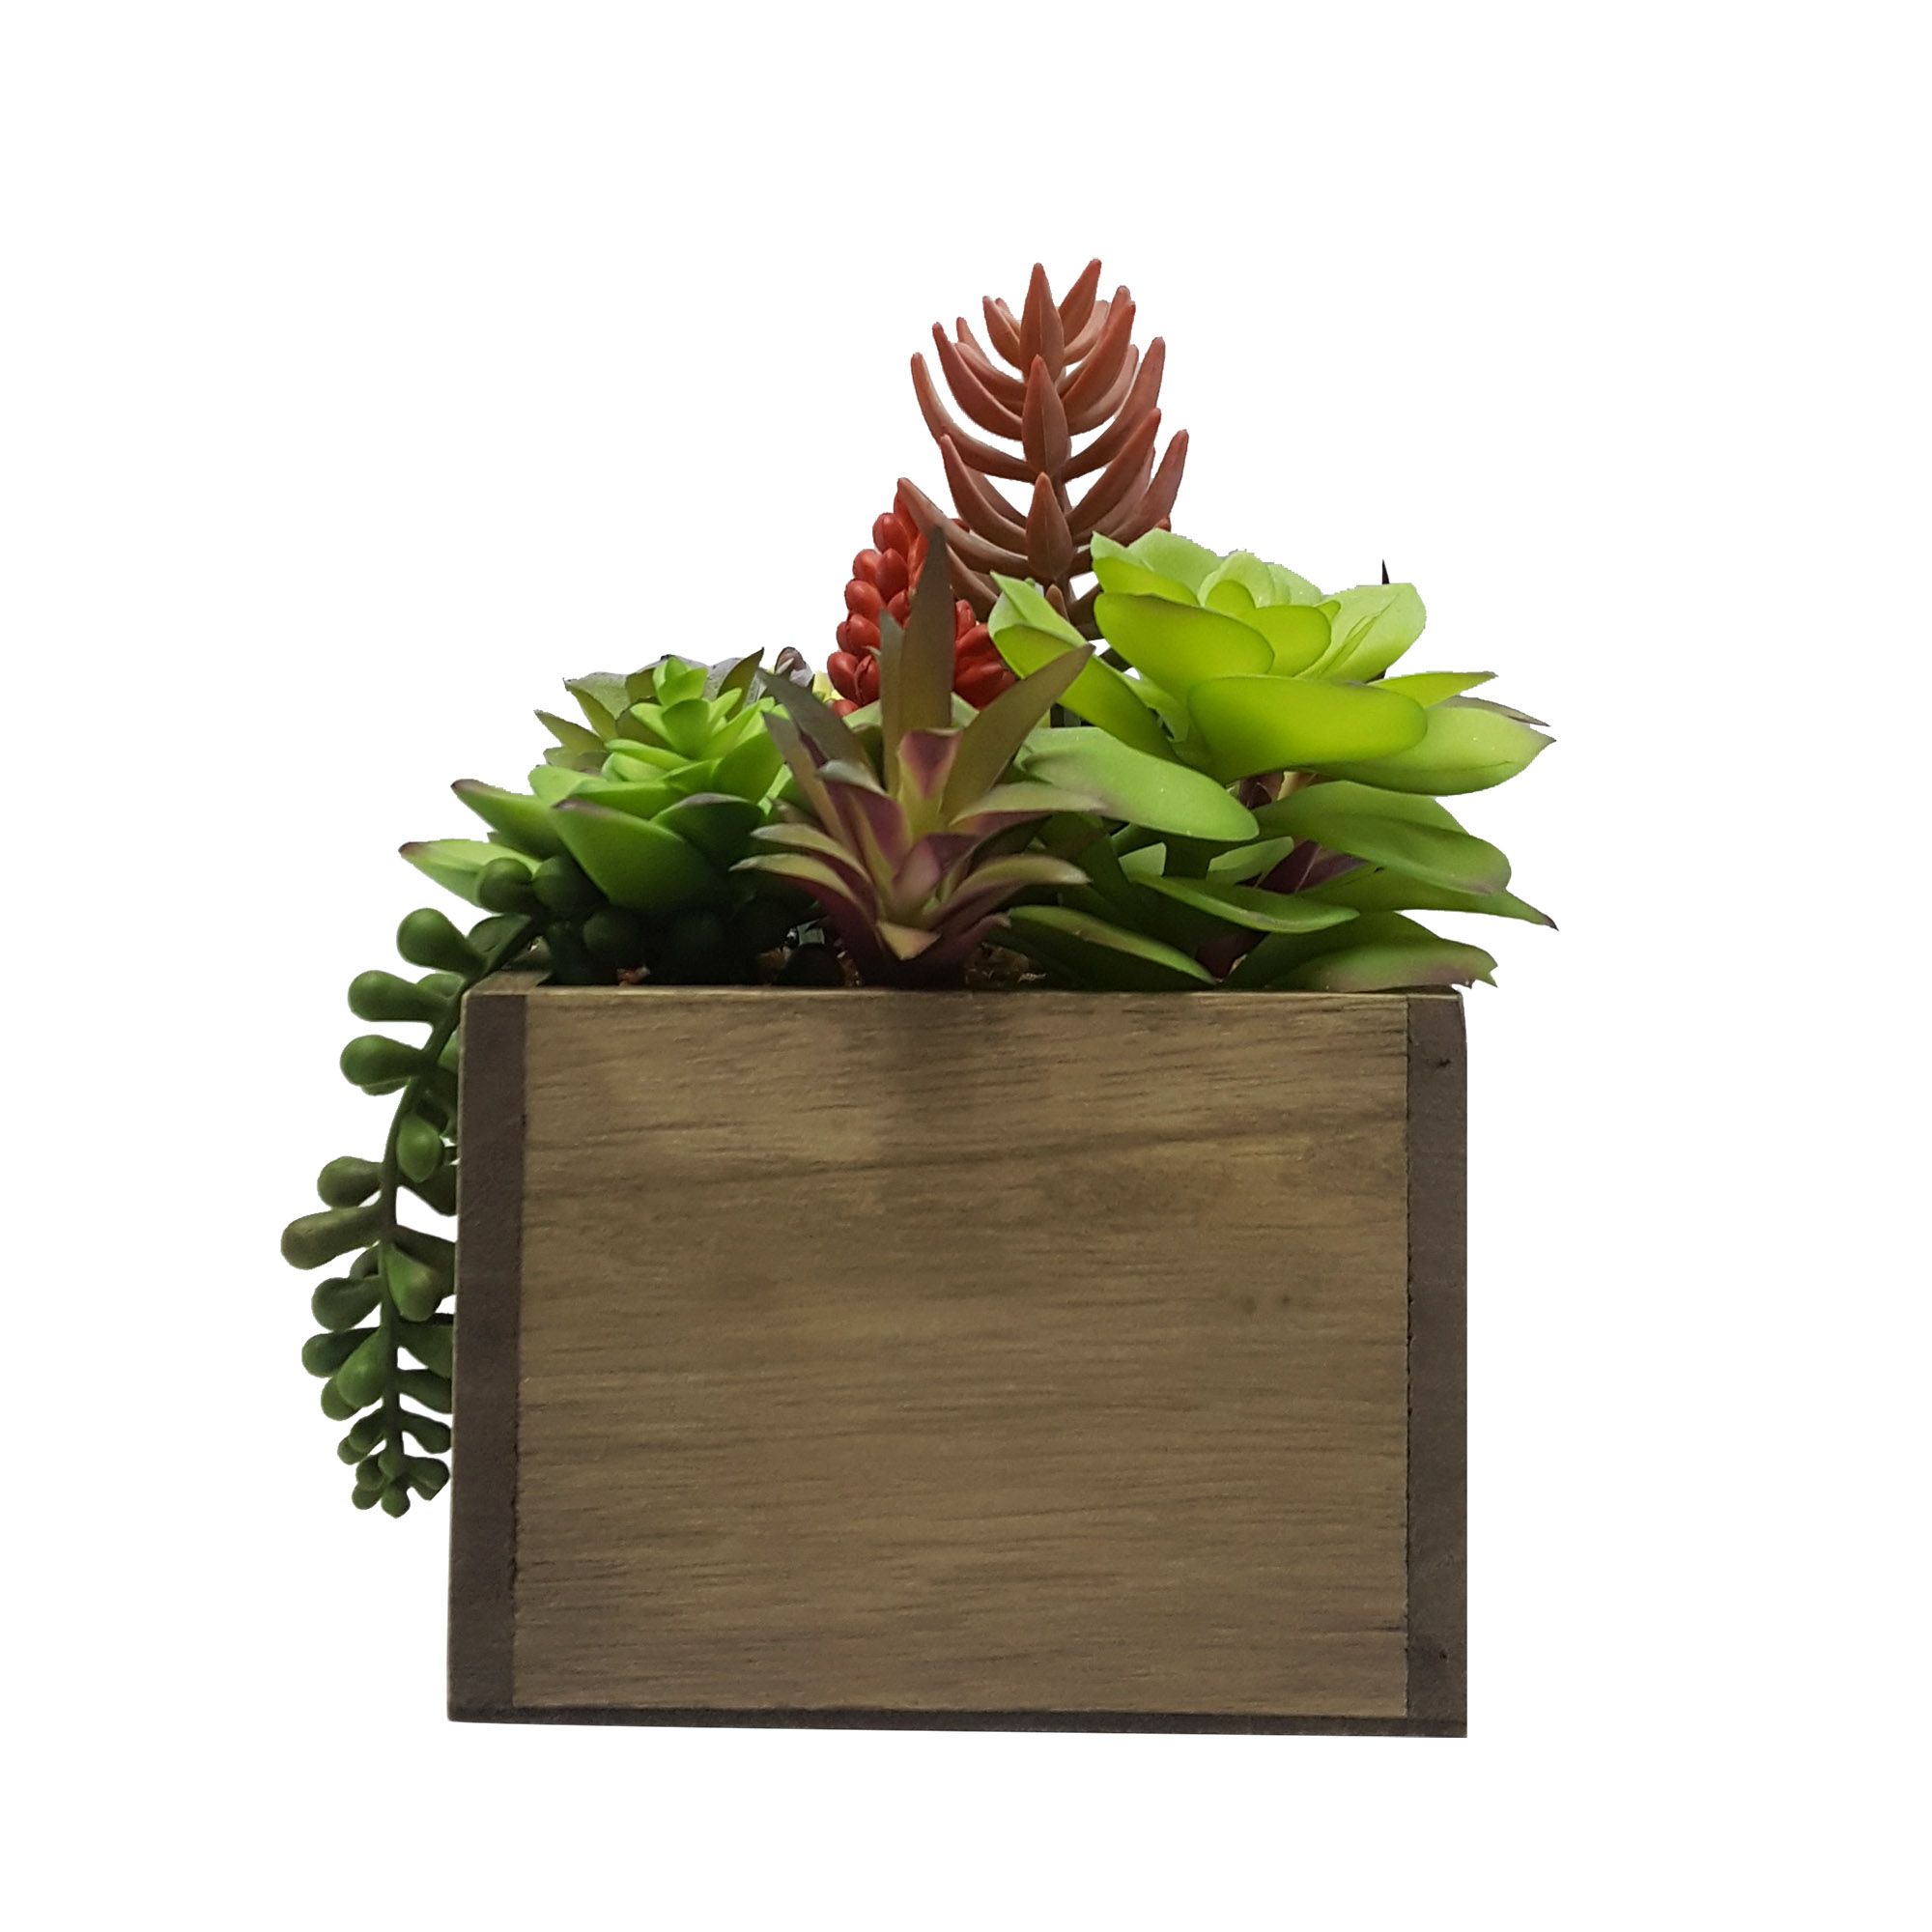 Better Homes & Gardens 7.5" Artificial Mixed Succulent Plants in Brown Wood Box - image 4 of 7